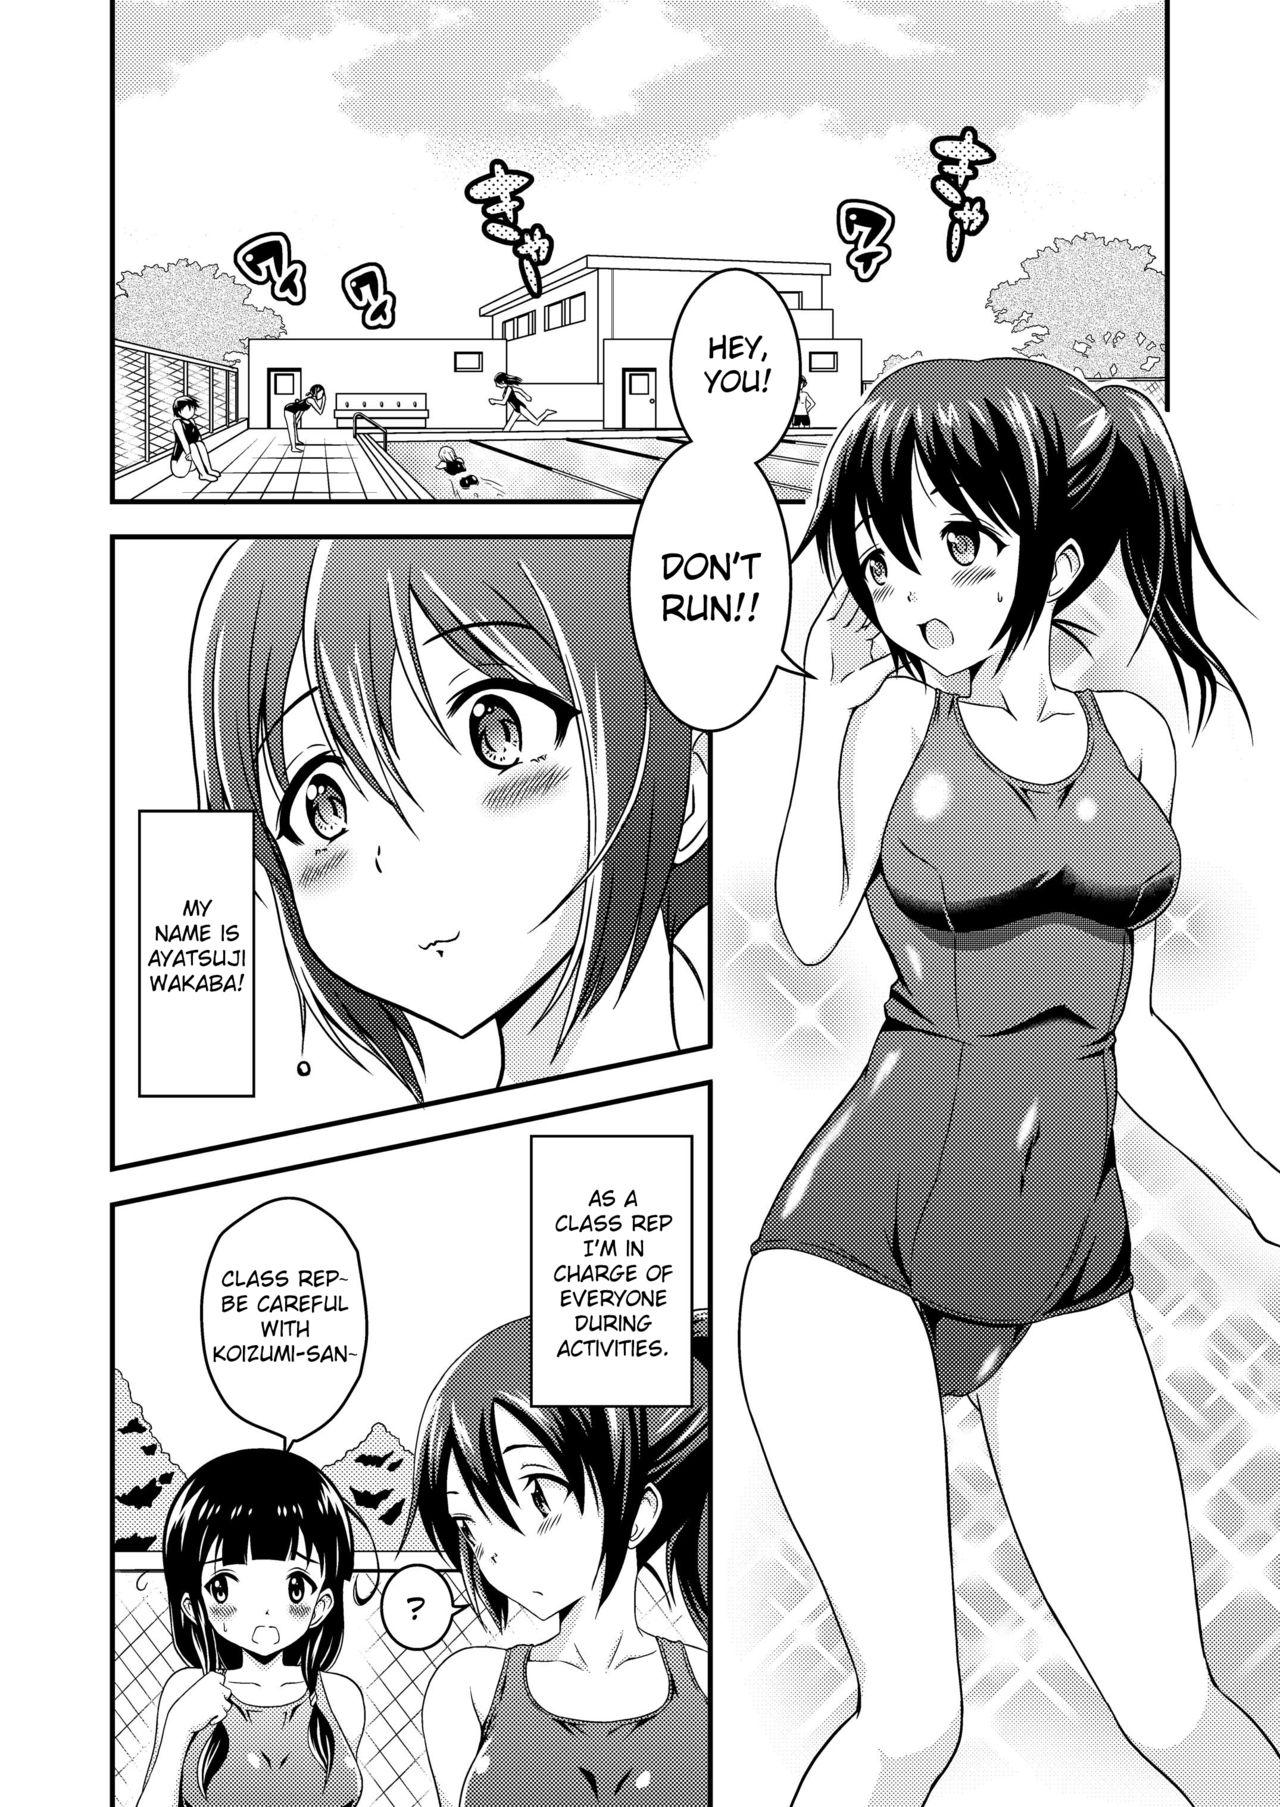 Boobies Hentai Roshutsu Friends - Abnormal Naked Friends Gay Emo - Page 2